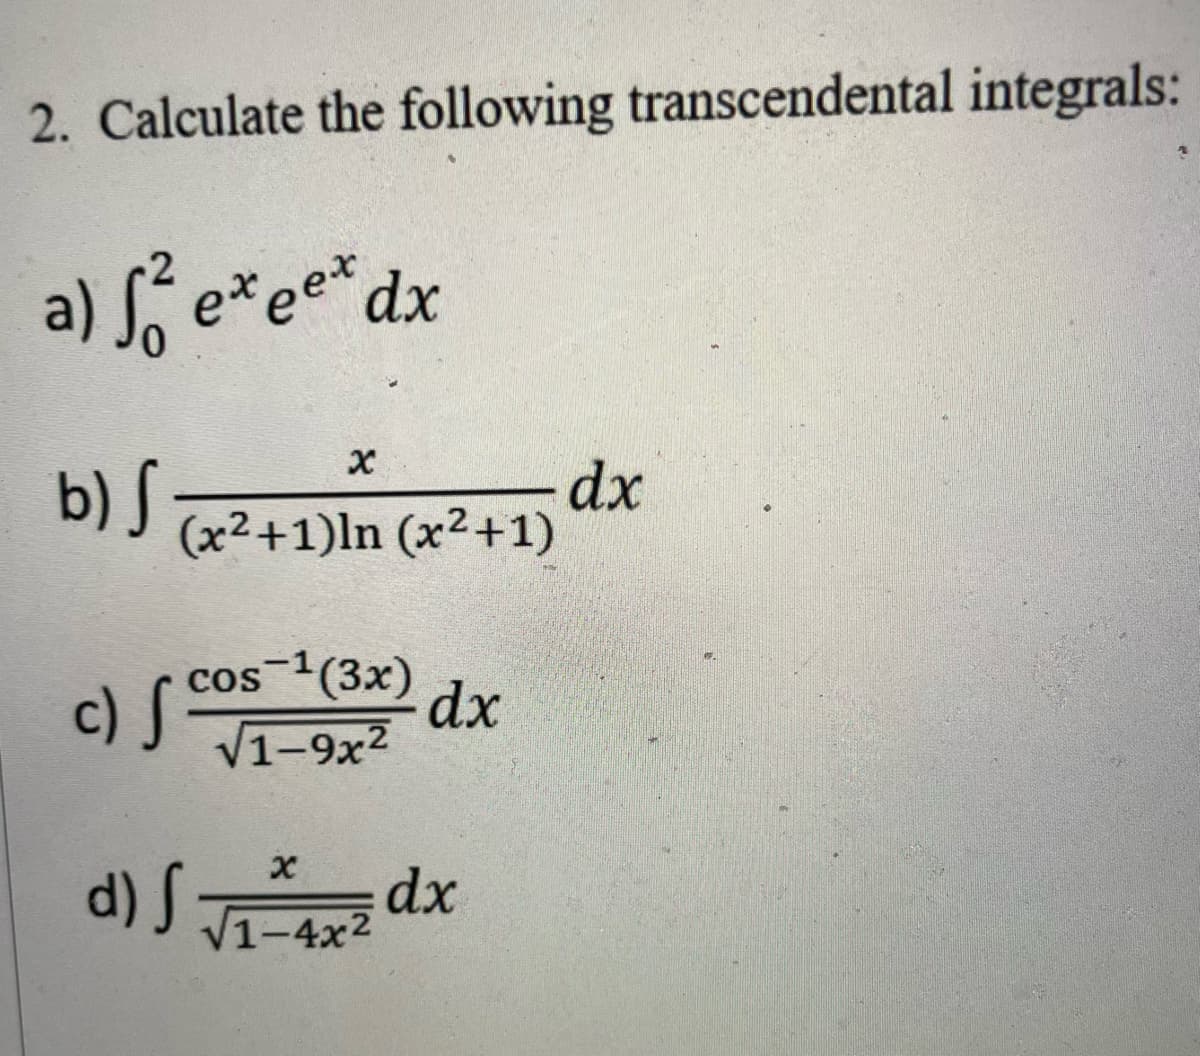 2. Calculate the following transcendental integrals:
a) S² e* ee* dx
X
b) S
(x²+1)In (x²+1) dx
cos ¹(3x)
dx
√1-9x²
x
√1-4x²
c) S
d) S
dx